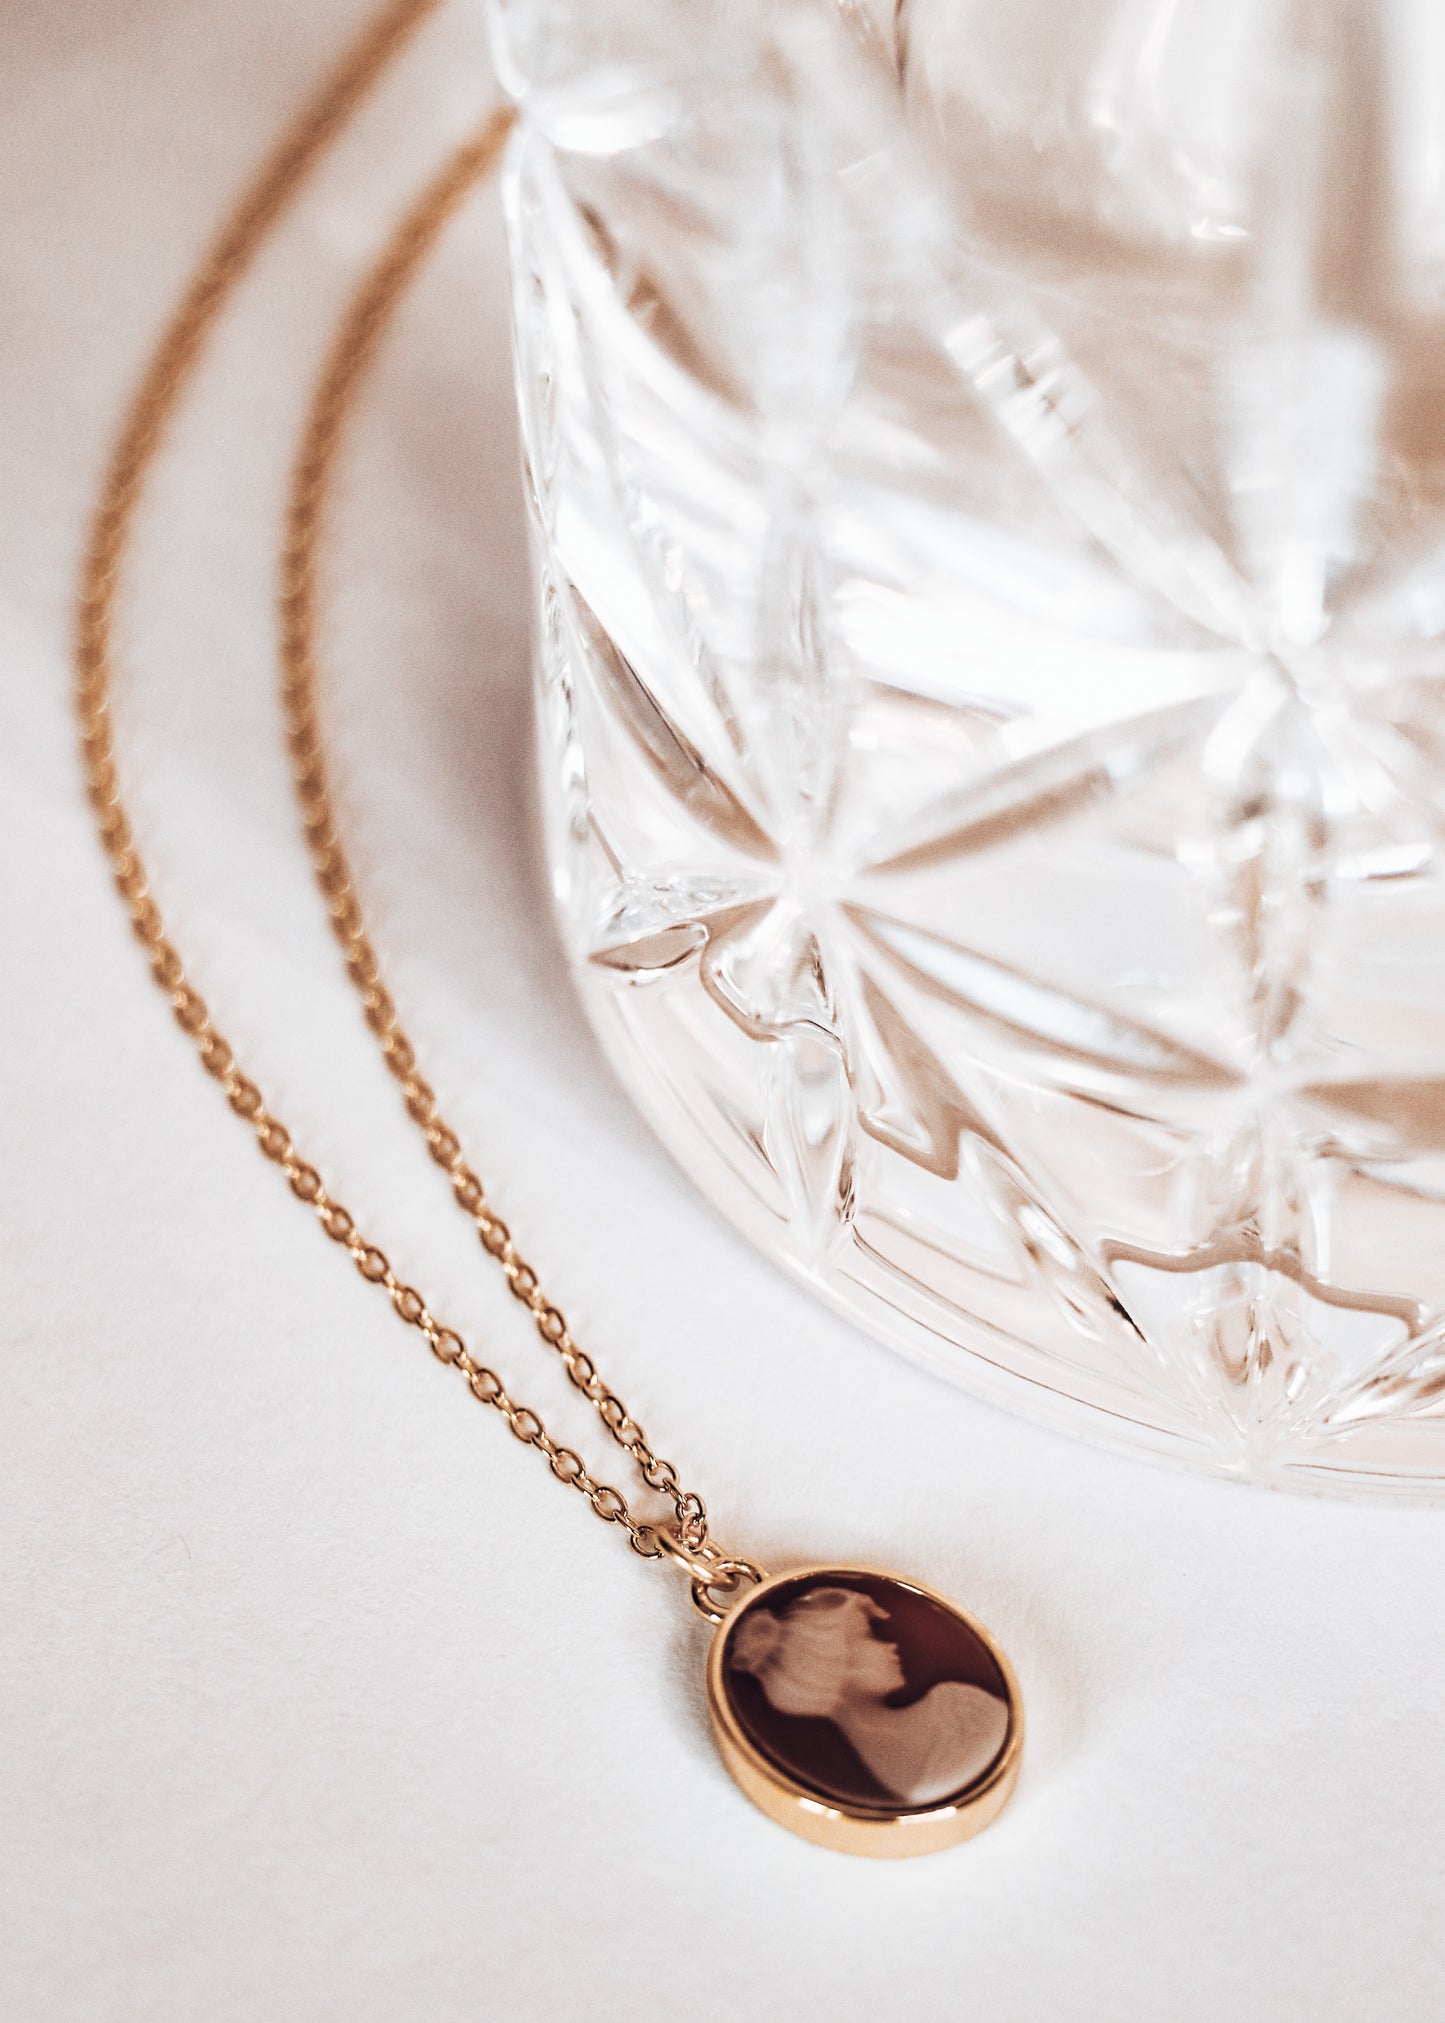 Viennese Love Story Necklace | Red Agate